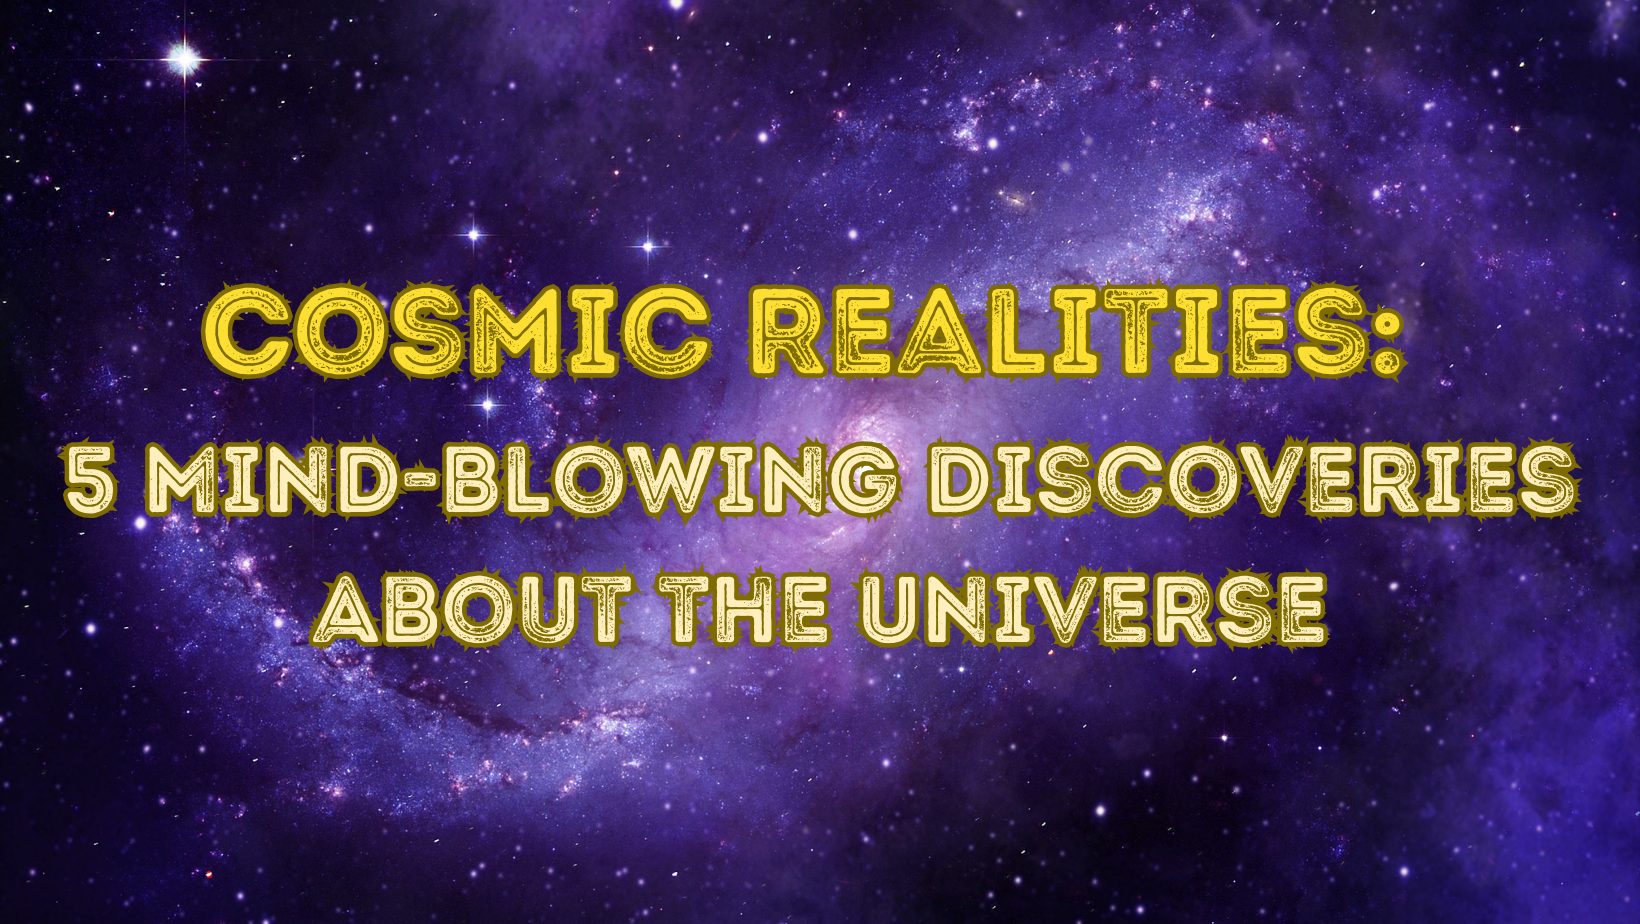 universe in violet hue and text read as Cosmic Realities: 5 Mind-Blowing Discoveries About the Universe